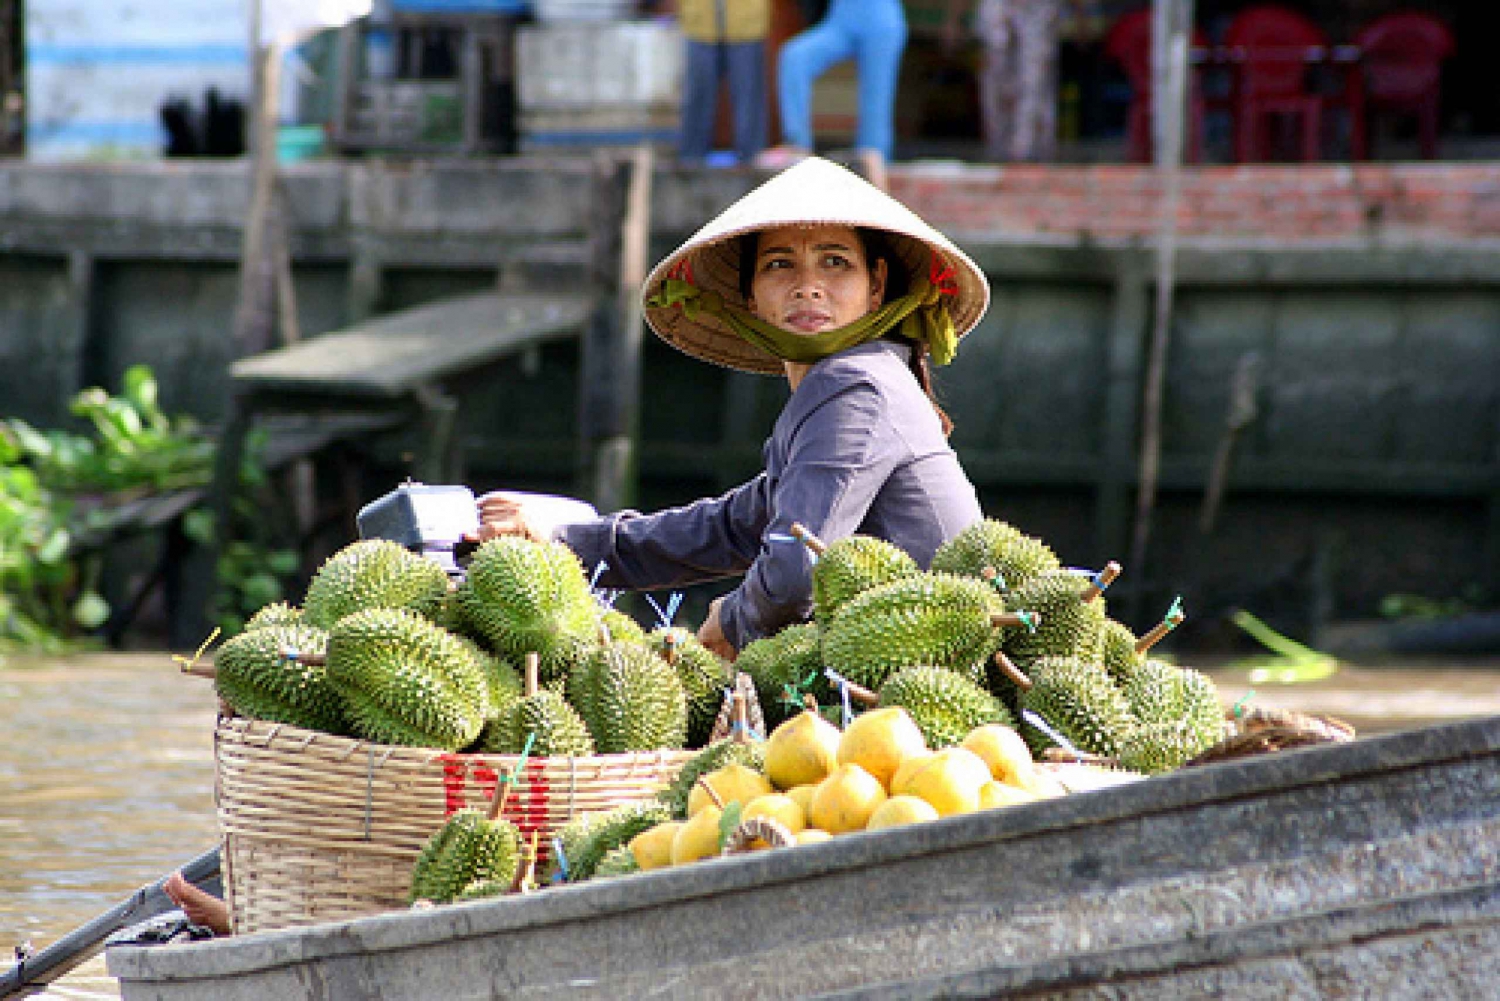 3-Day Tour of the Mekong Delta Region from Ho Chi Minh City